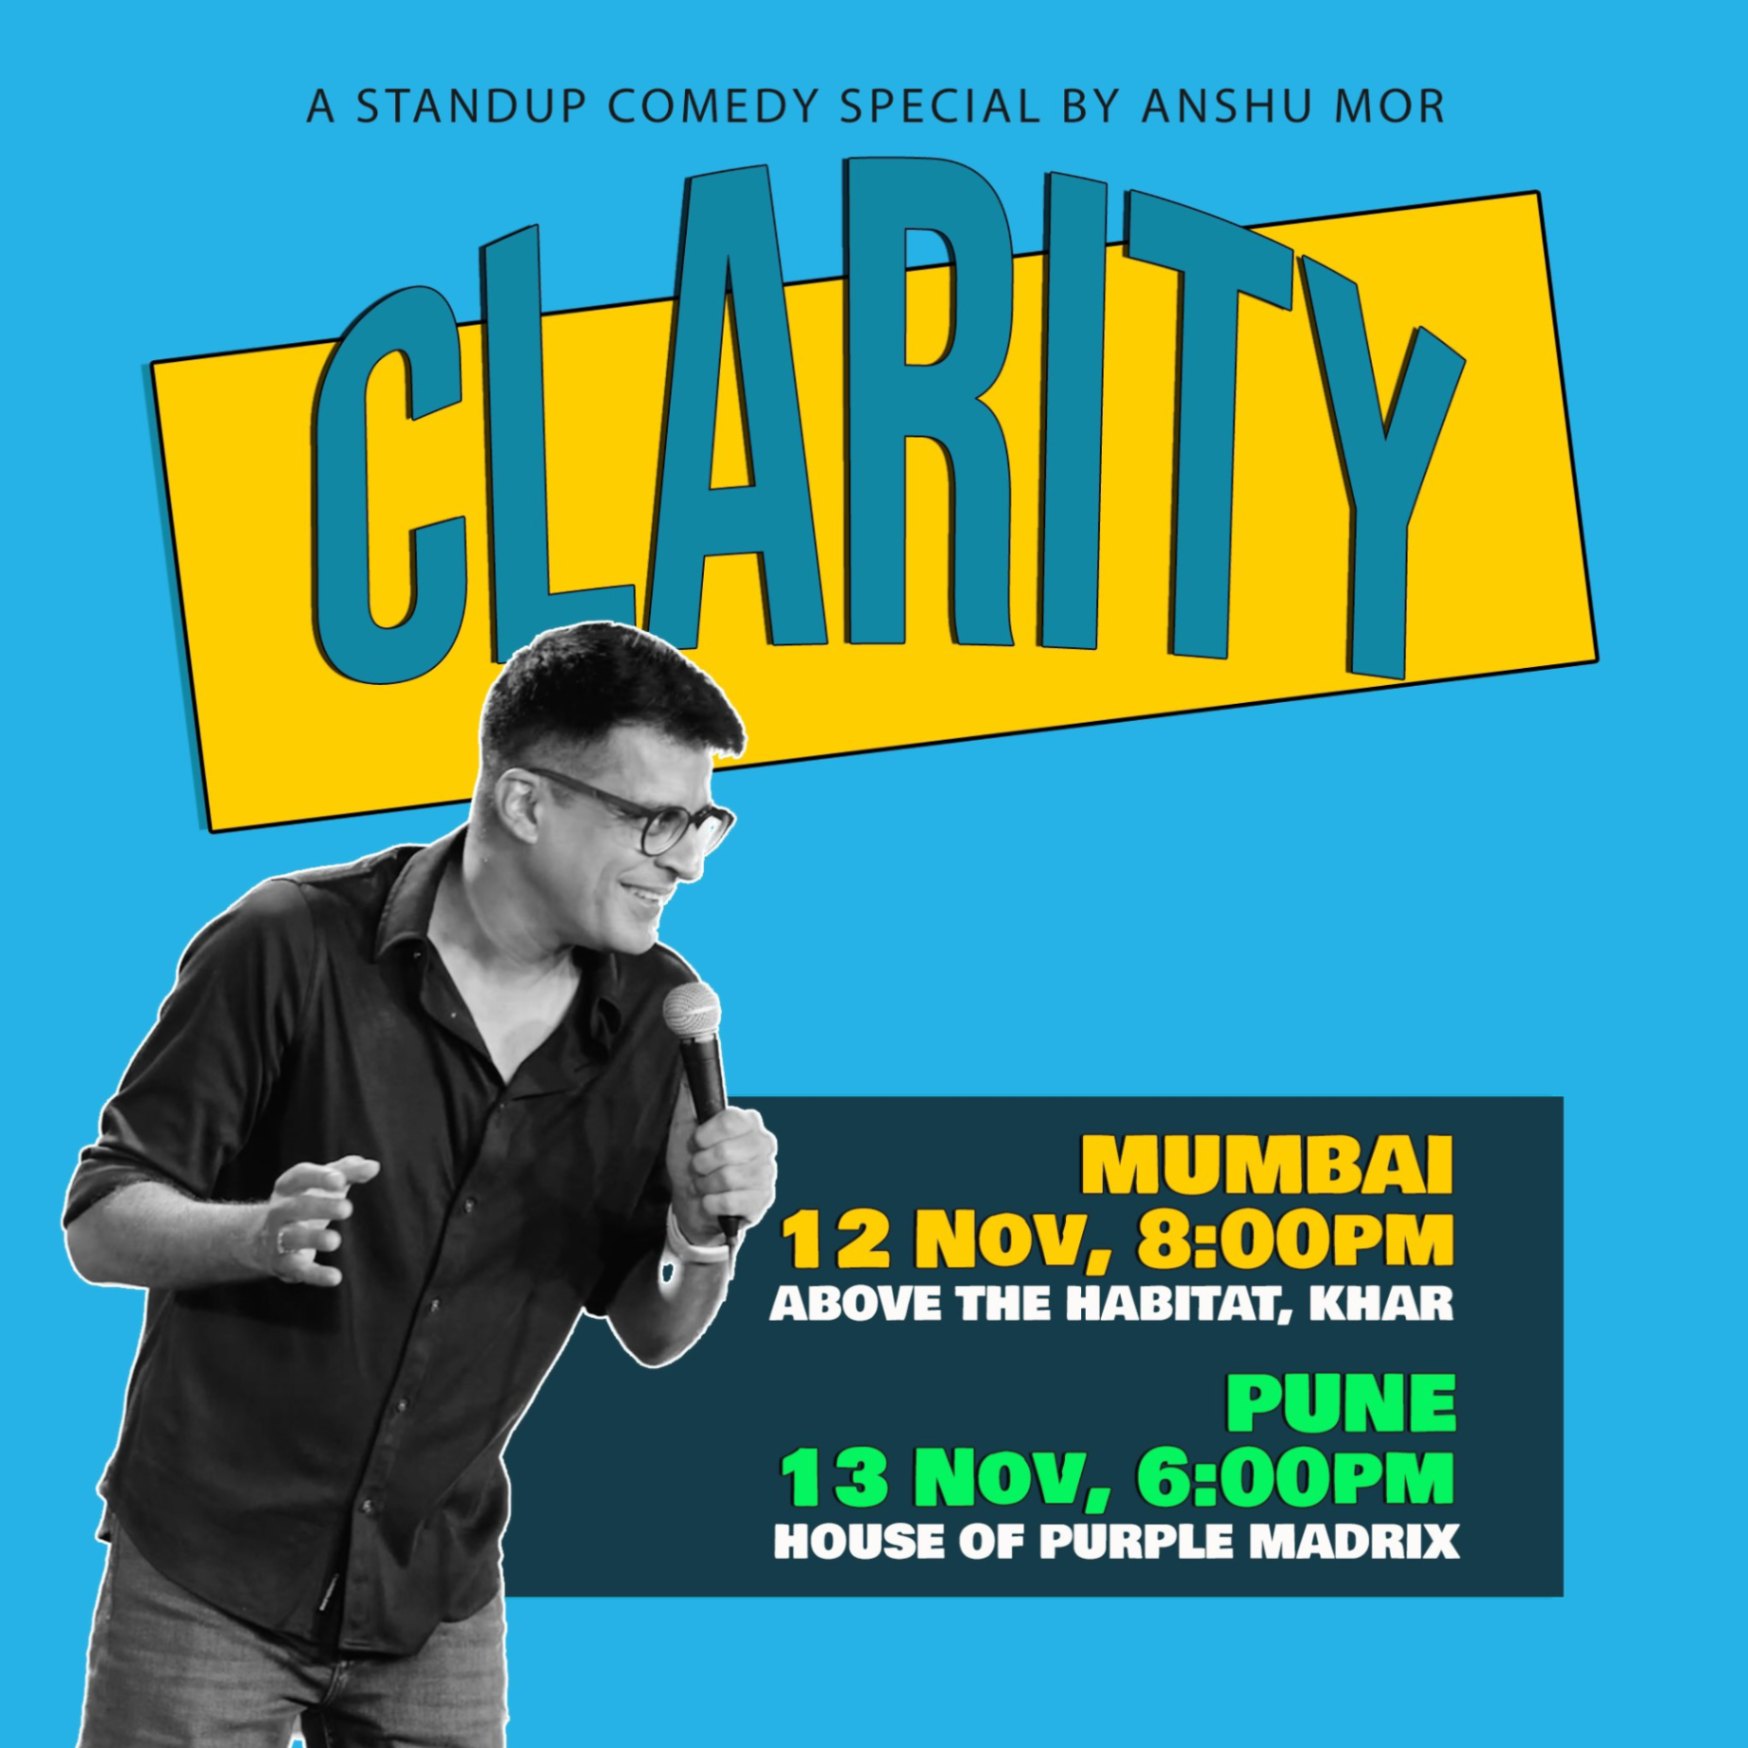 CLARITY - Stand Up Comedy Solo by Anshu MorCLARITY is a hilarious new standup comedy special from Anshu Mor, where in his inimitable style of observational comedy & hilarious storytelling.Venue# House Of Purple Madrix, PuneDate# Nov 13thTime# 6:00 pmBook Now# https://in.bookmyshow.com/even...